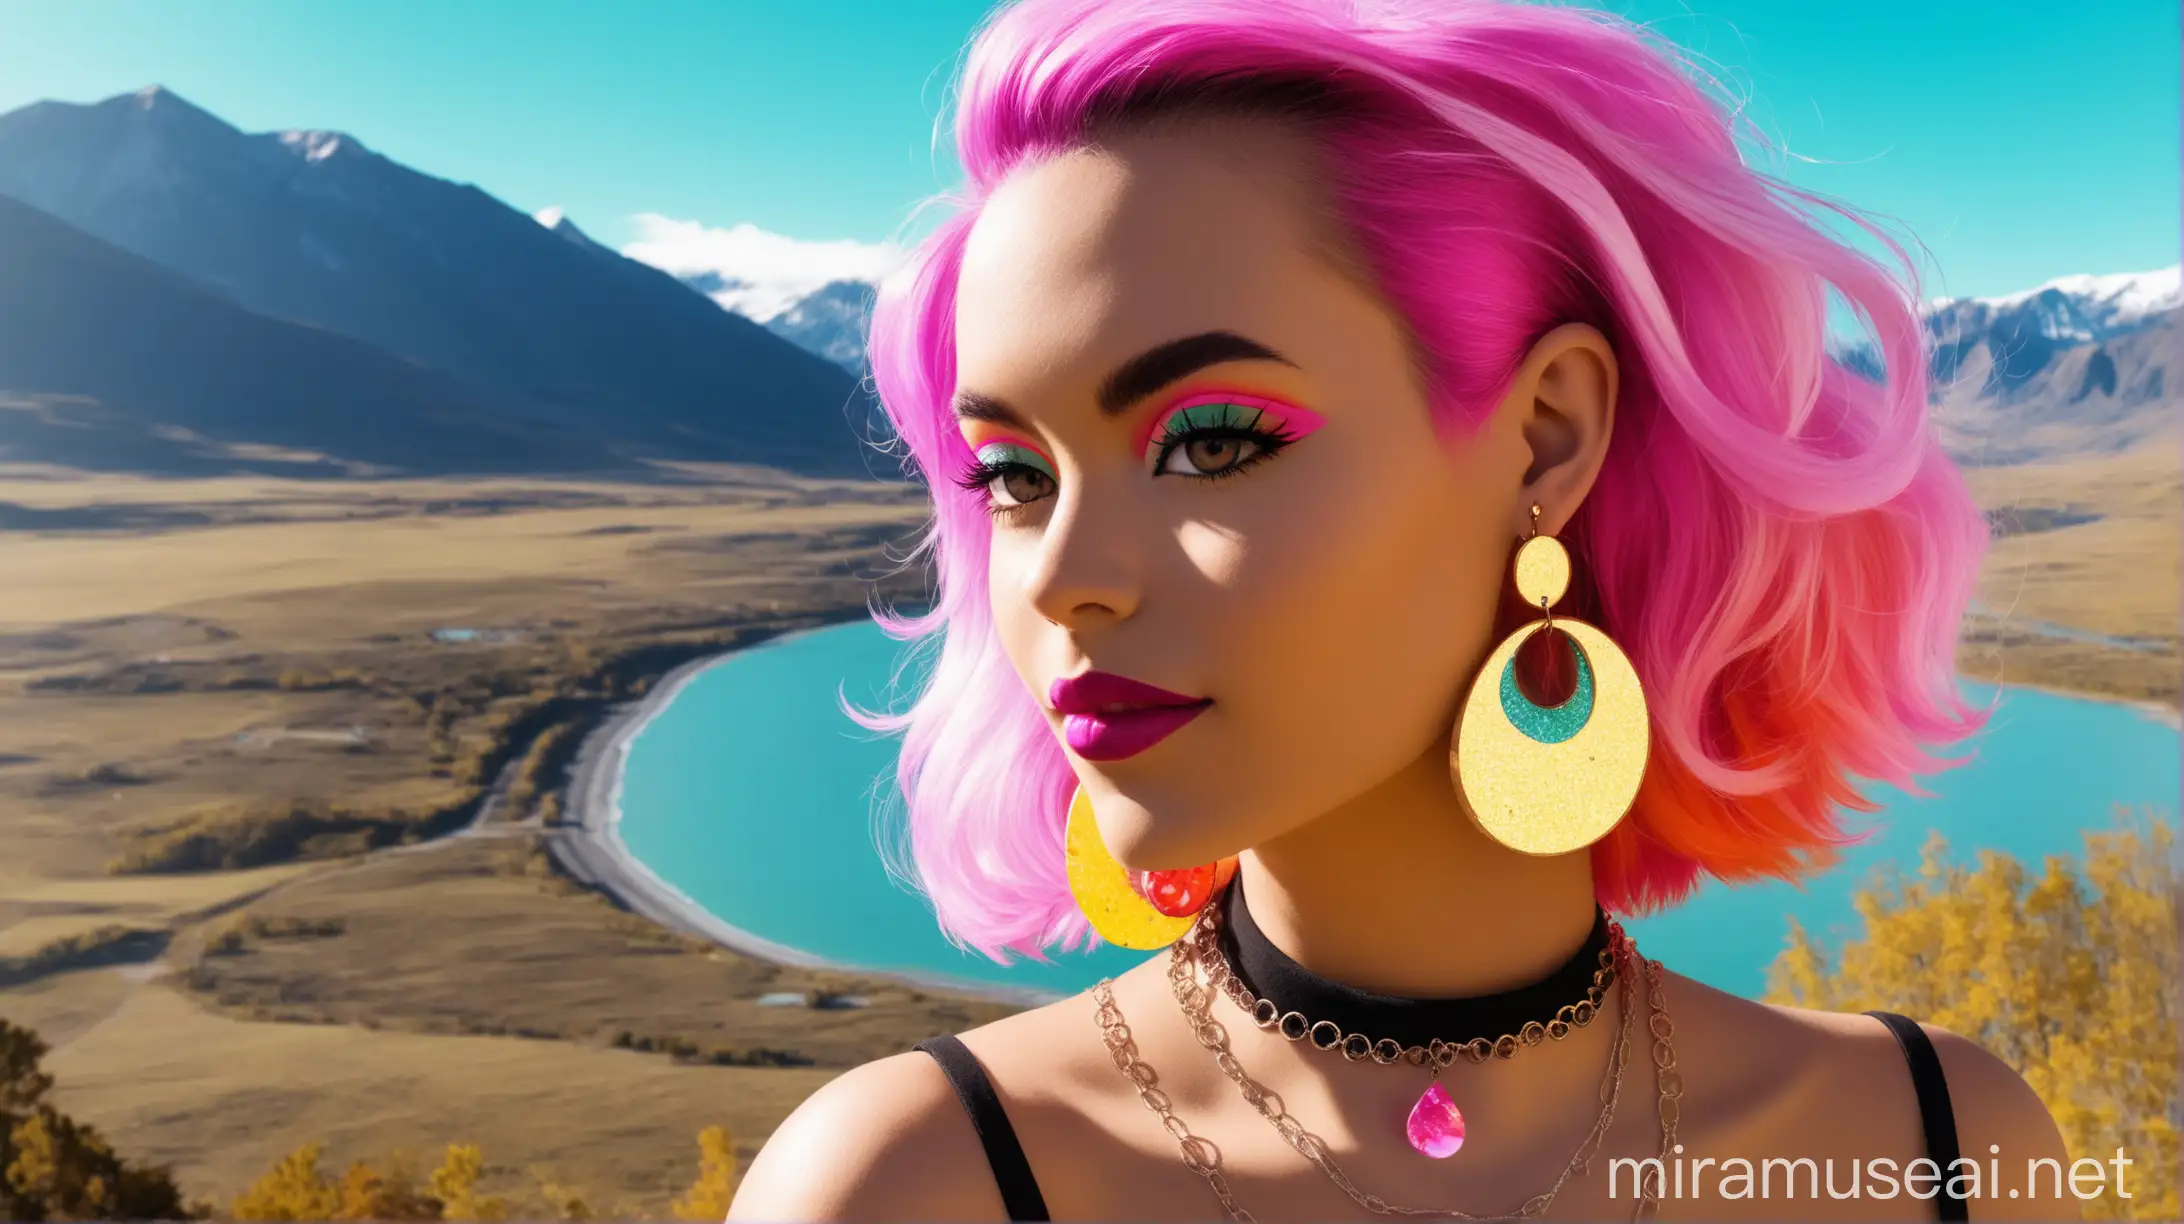 image of a funky lady wearing a resin earring and necklace, with a scenic background, make it more pop styled